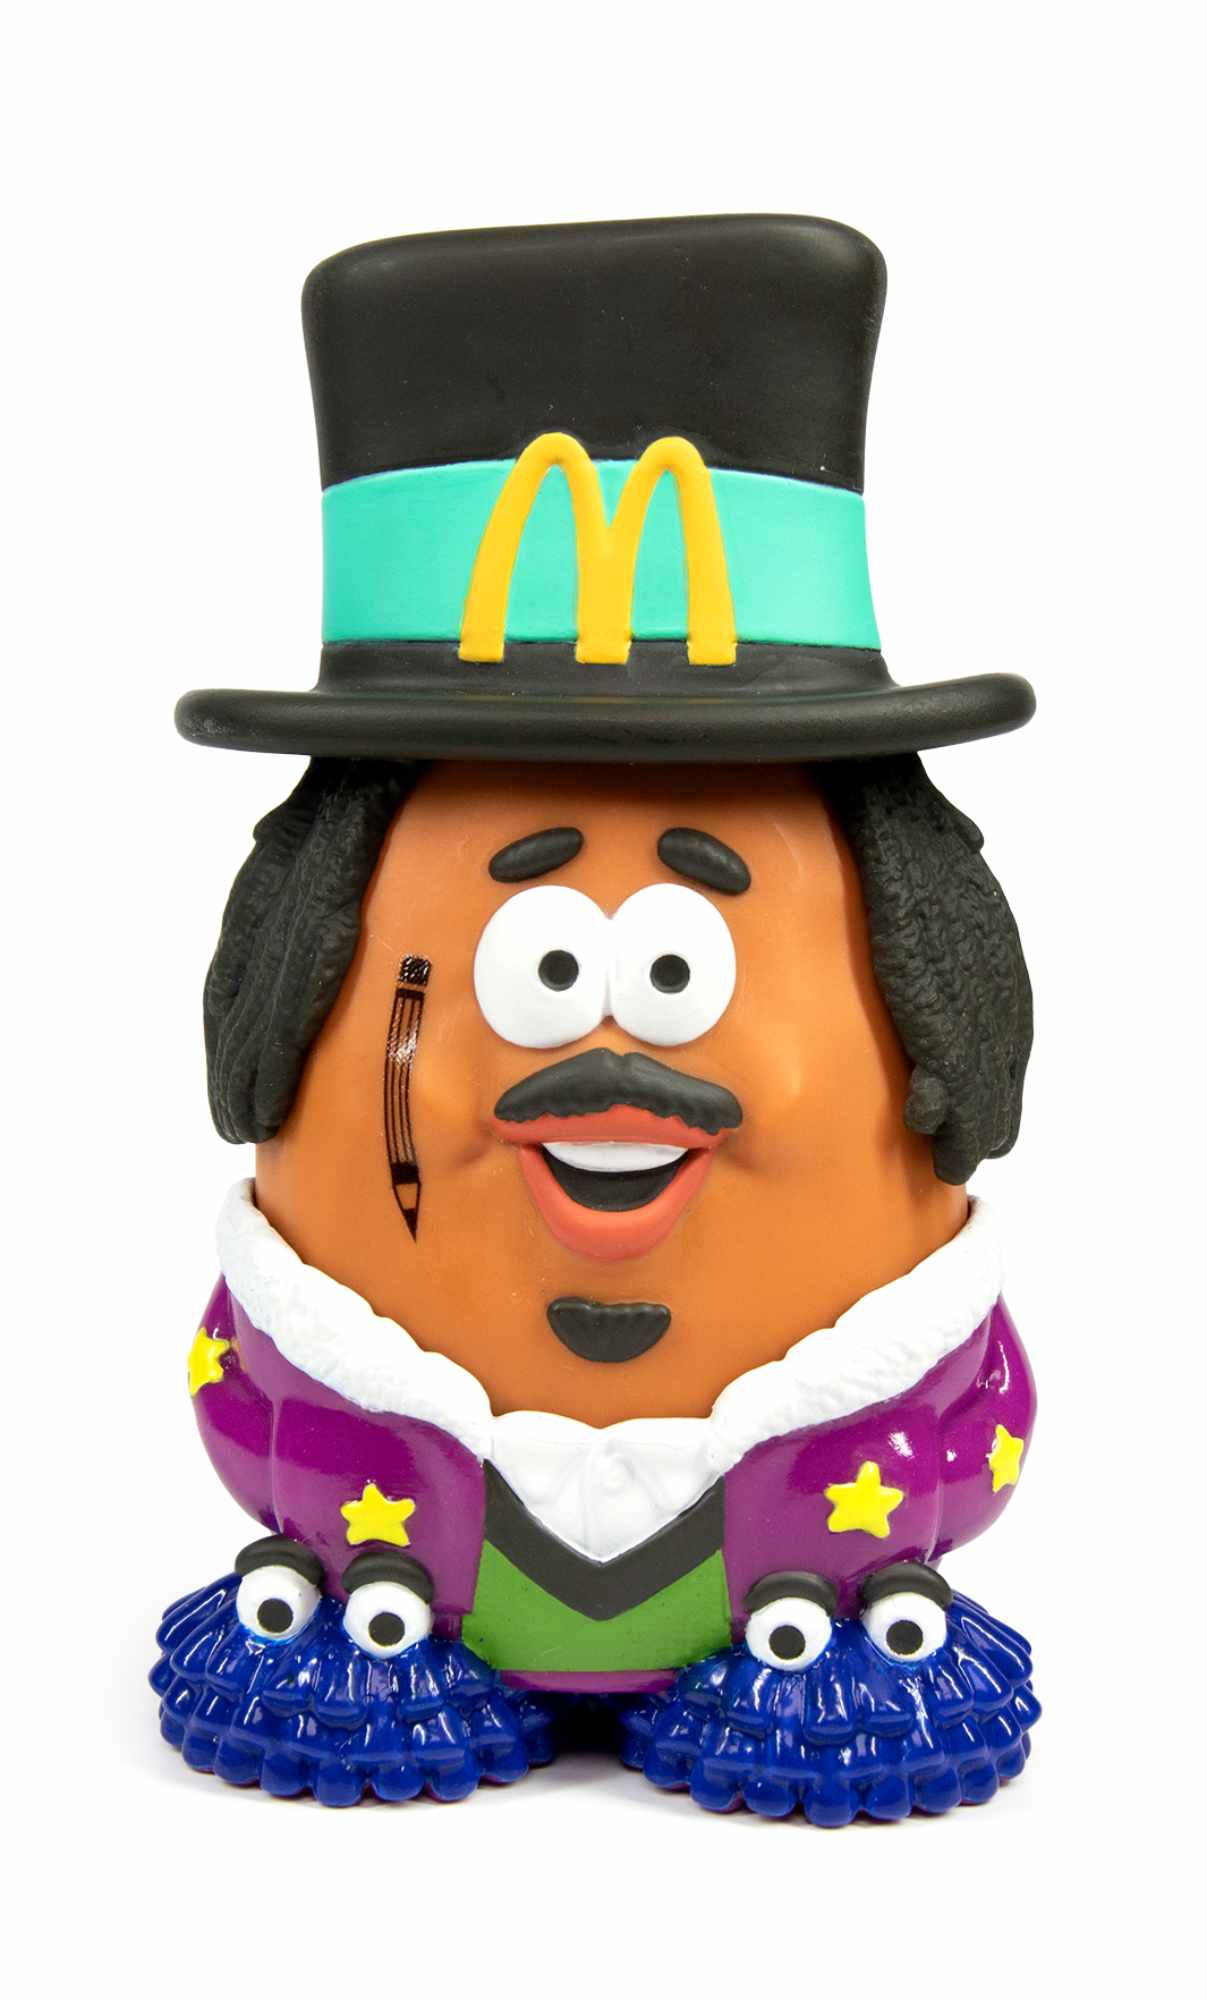 Kerwin Frost's McDonald's adult Happy Meal toys